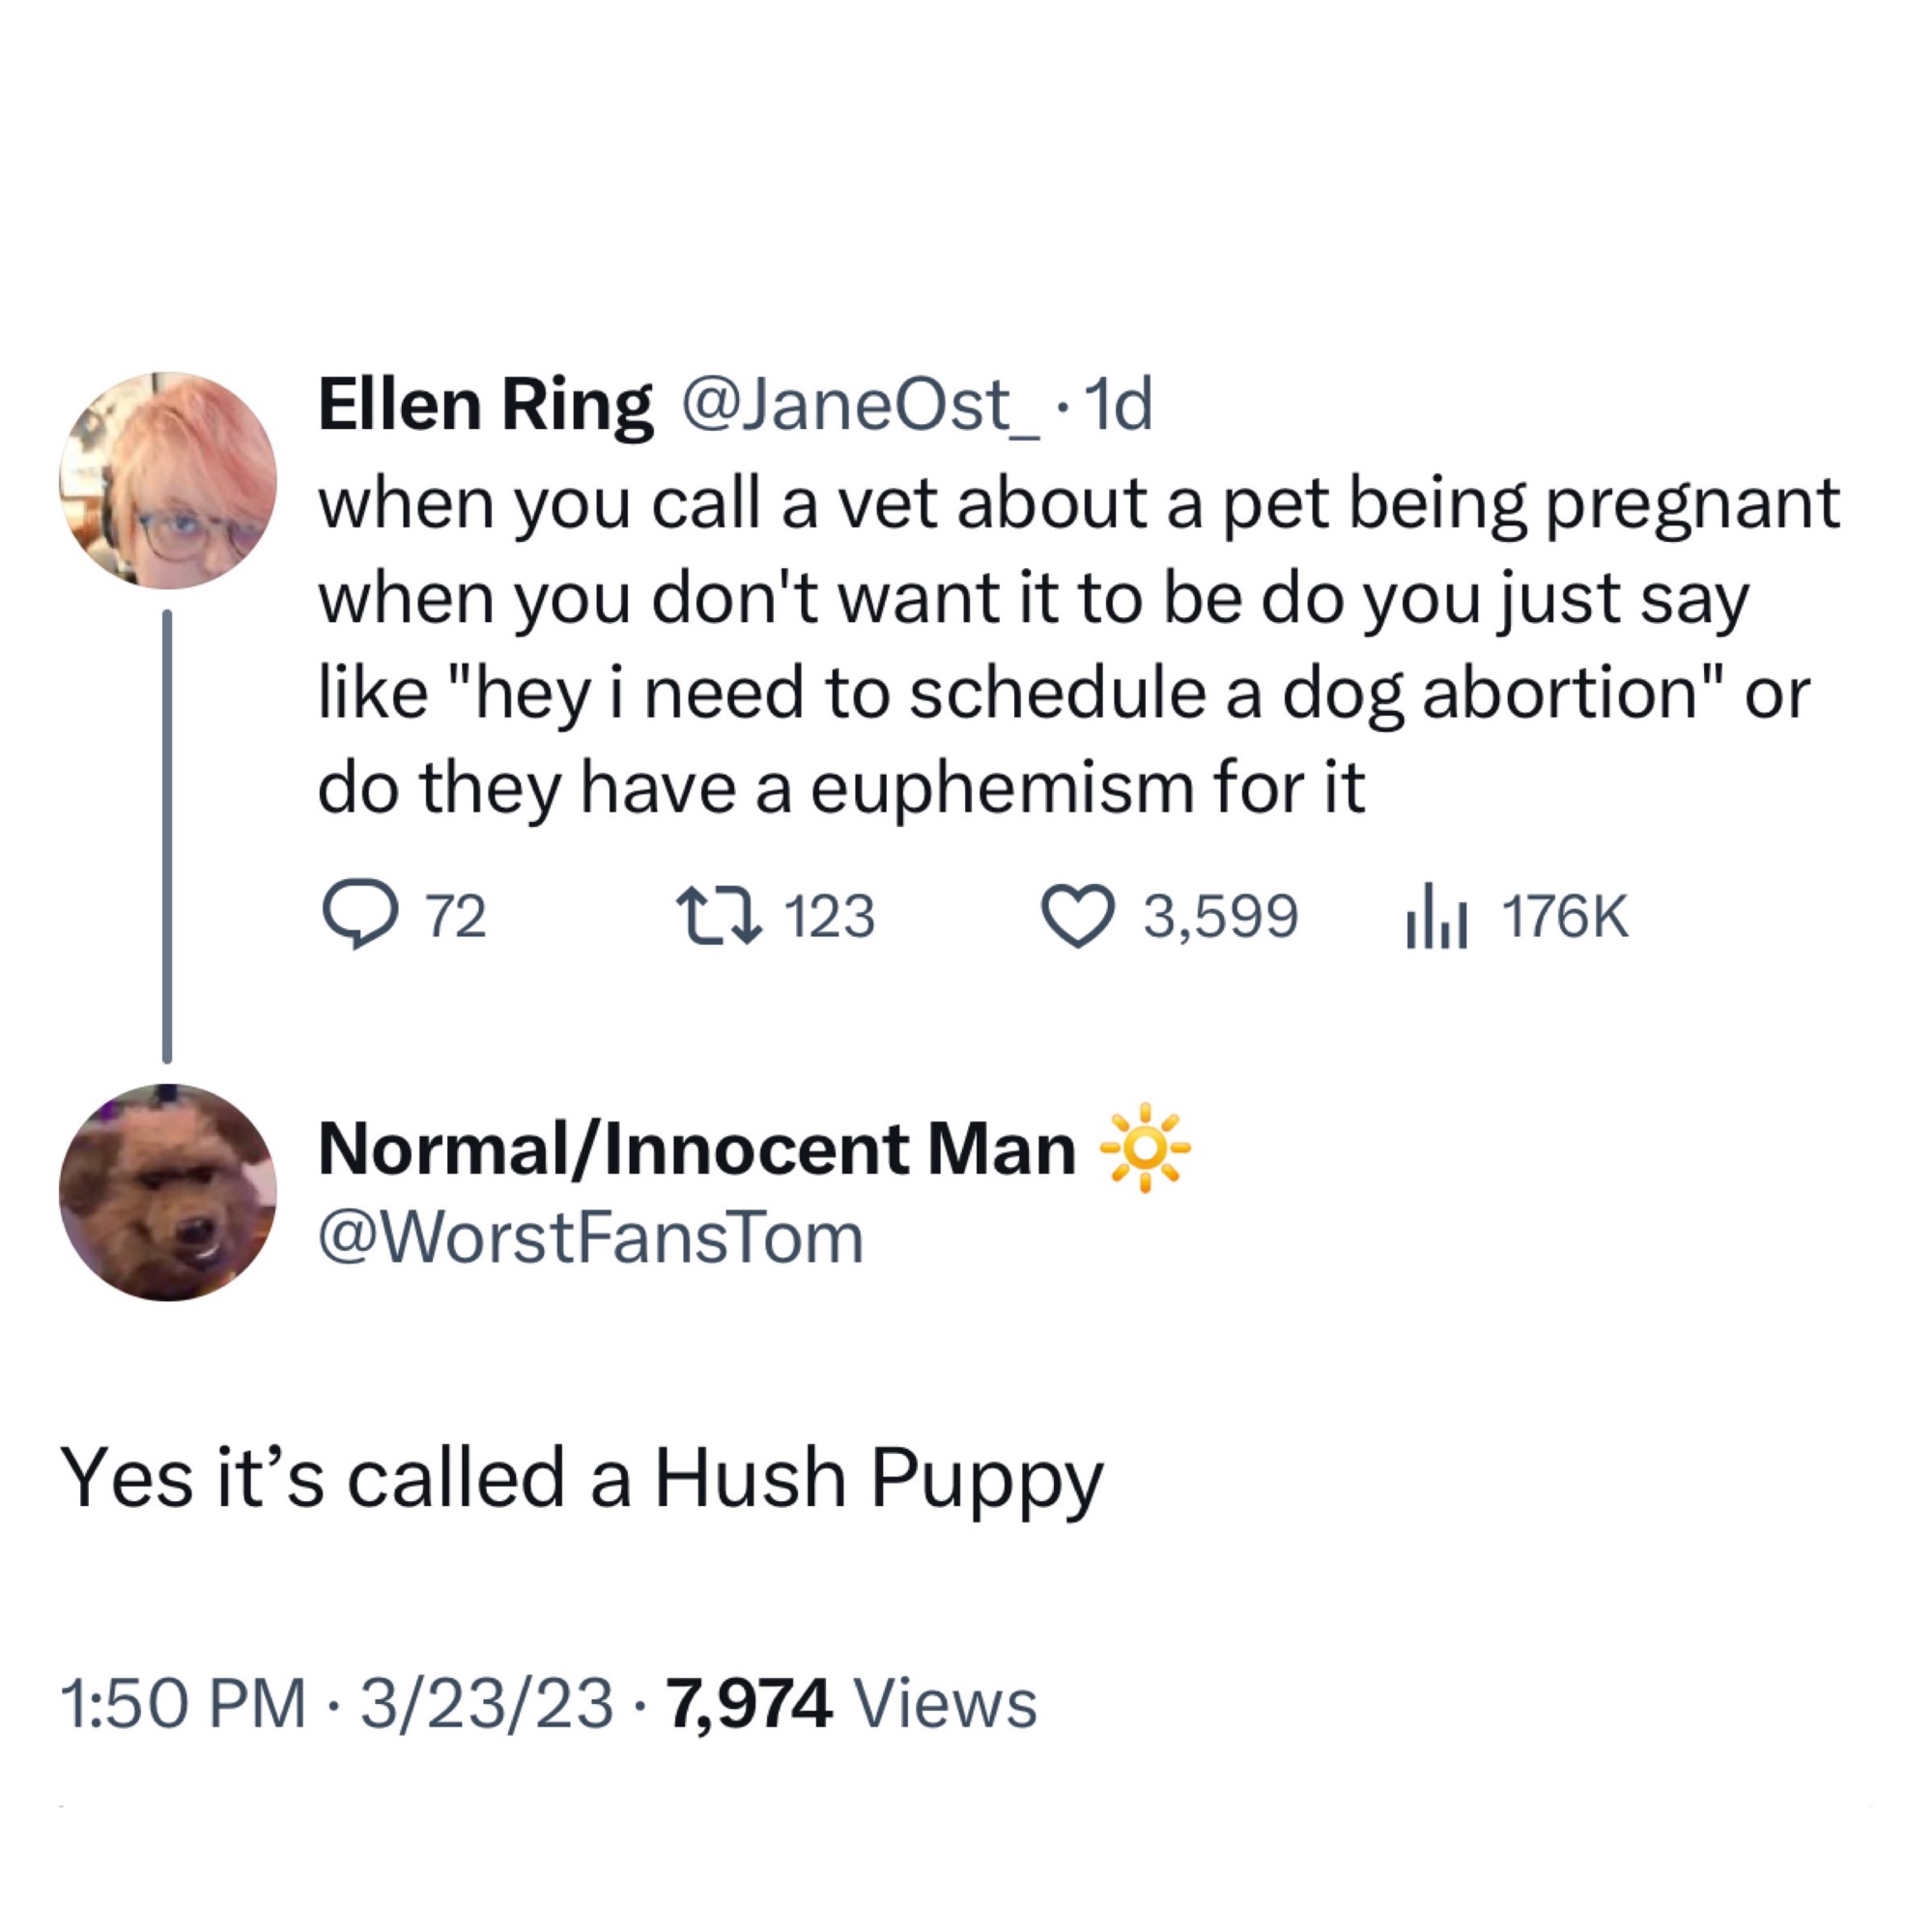 funny tweets - Ellen Ring .1d when you call a vet about a pet being pregnant when you don't want it to be do you just say